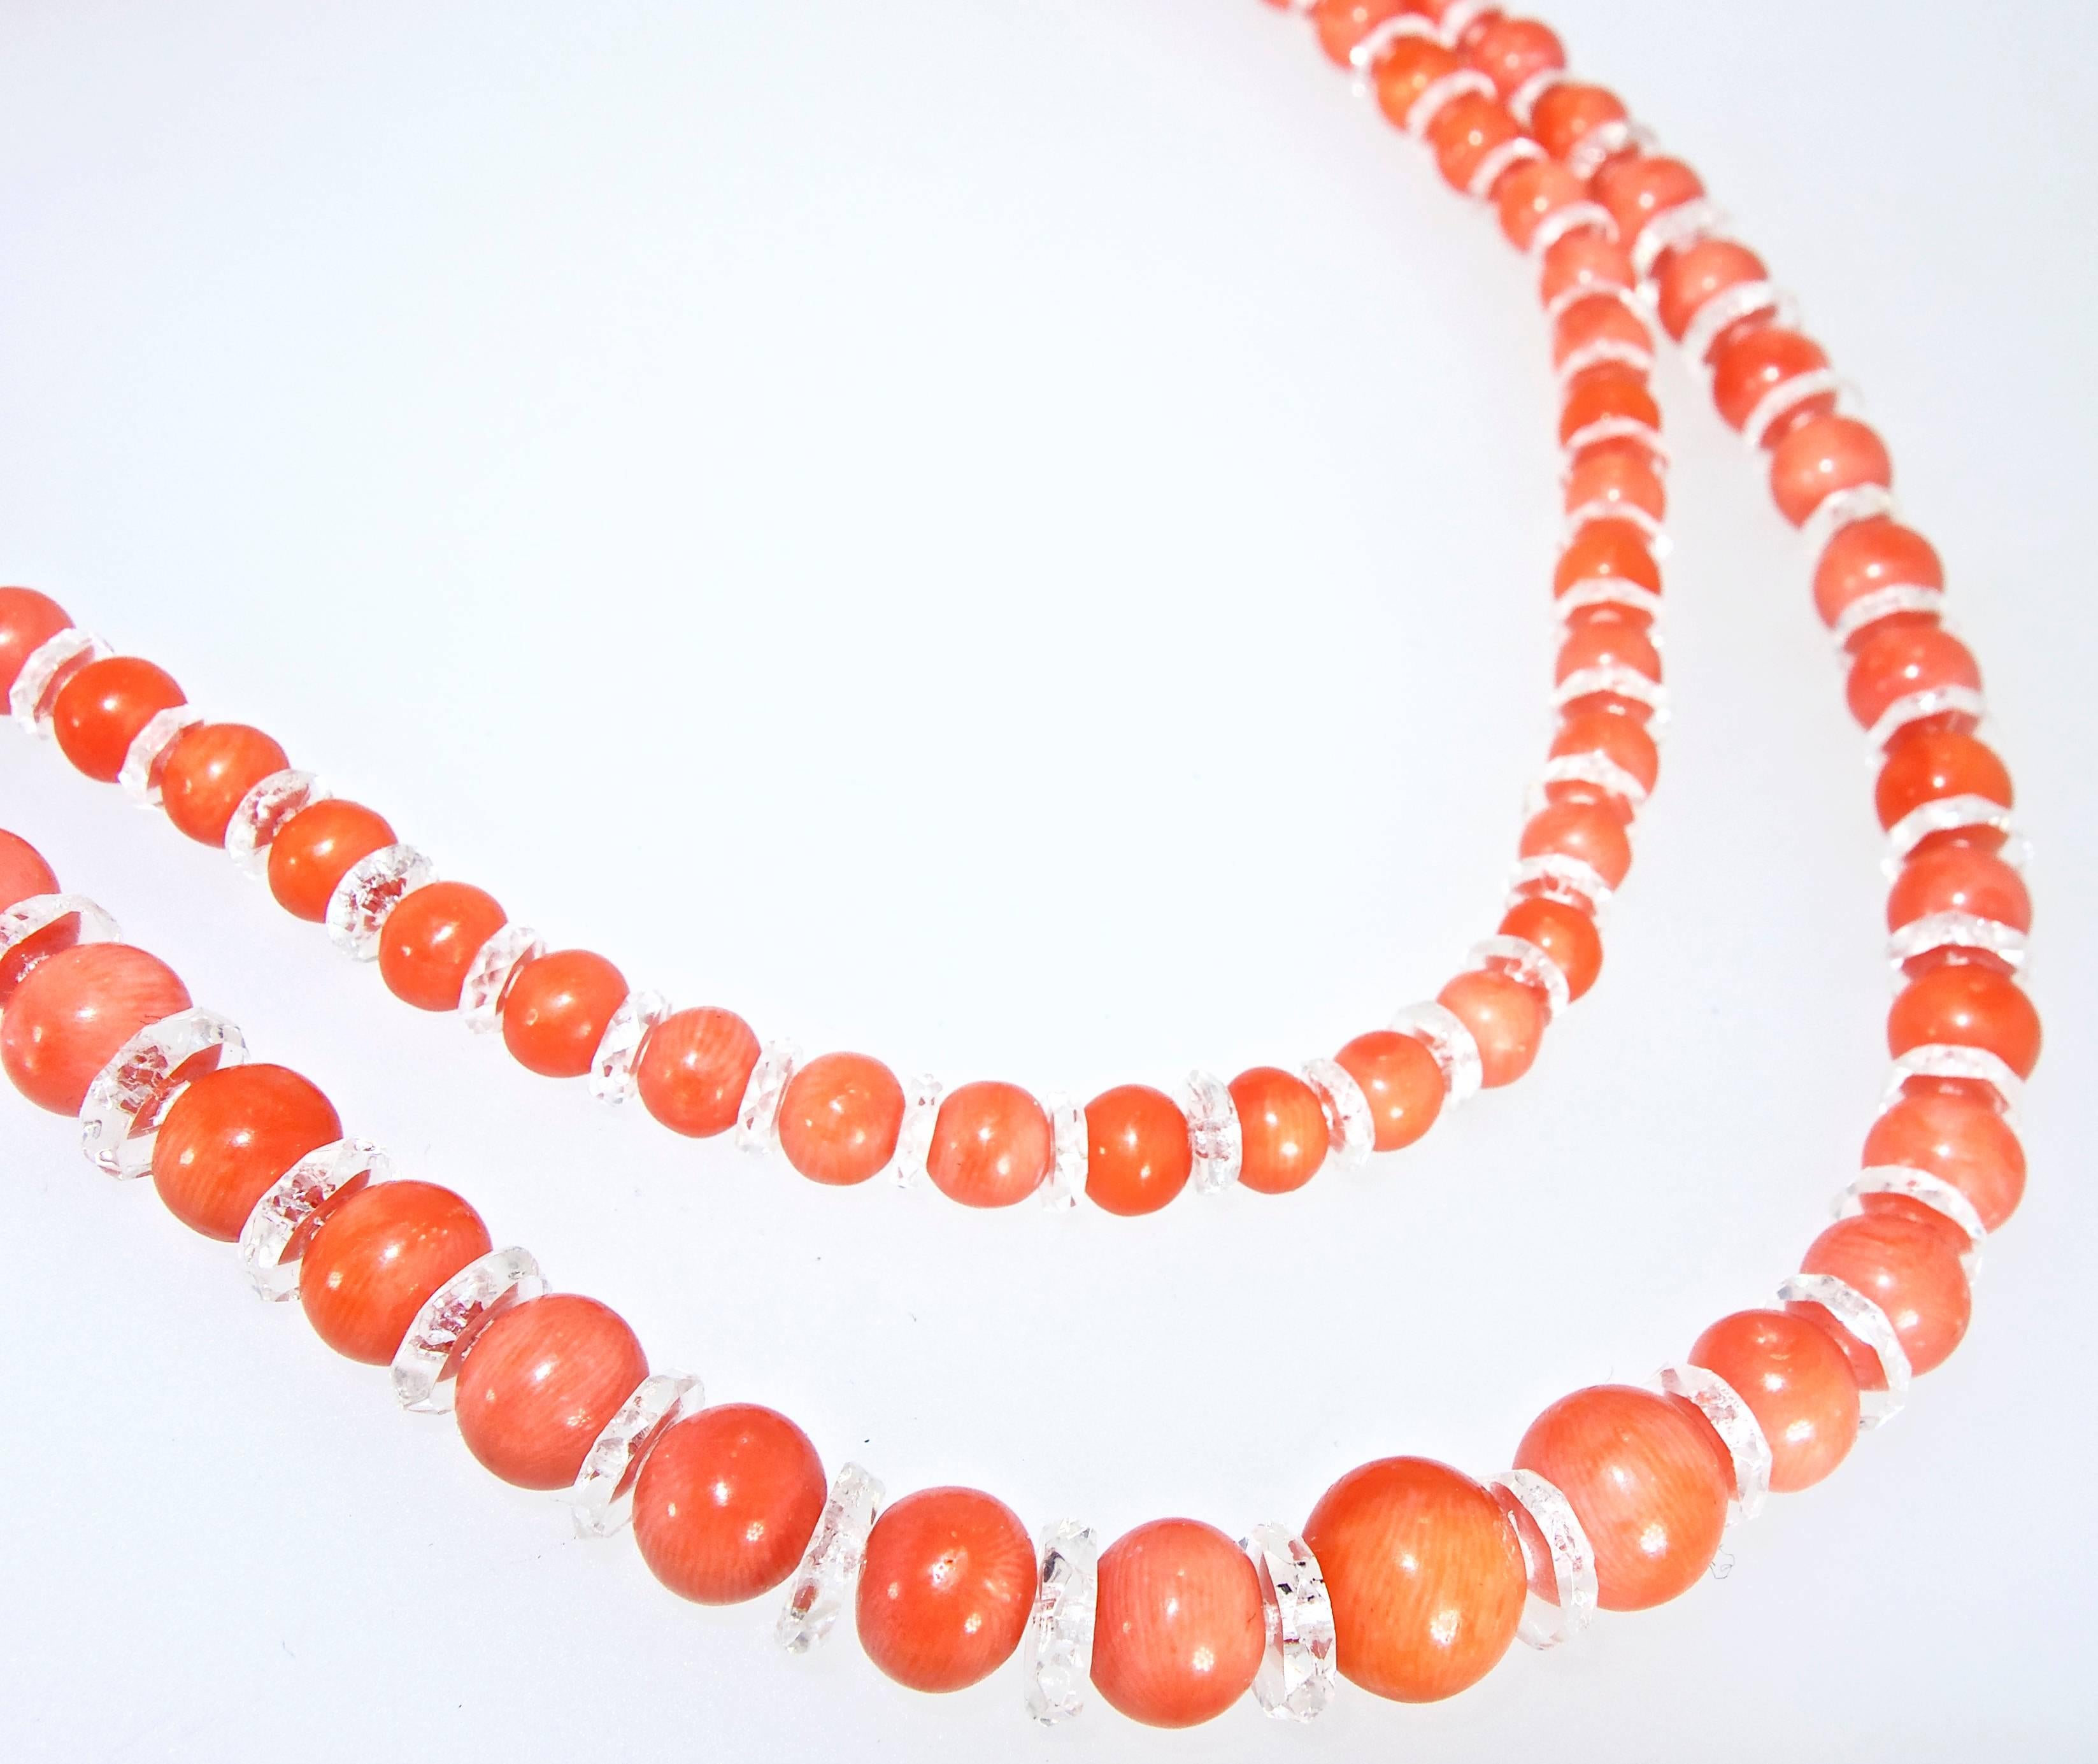 Natural coral measuring 8.74 mm to 5.35 mm, this coral is a medium bright orange color and is over 32 inches long.  Accenting the well match coral beads are faceted natural rock crystal roundels and this necklace is finished with an early 14K white